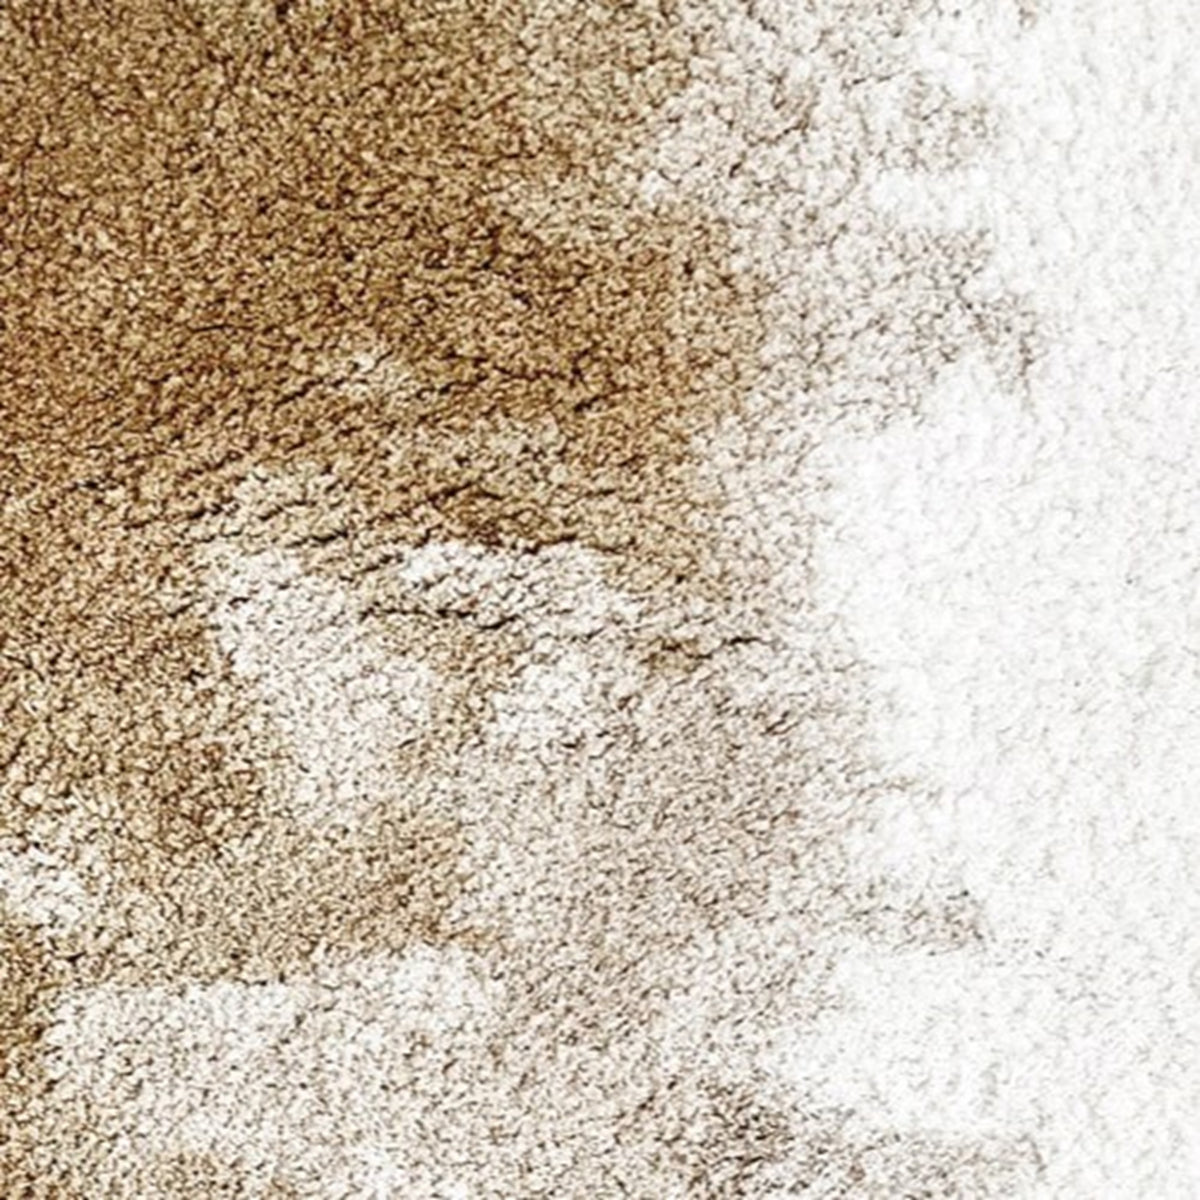 Swatch Sample of Graccioza Sand Bath Rugs in Color Natural